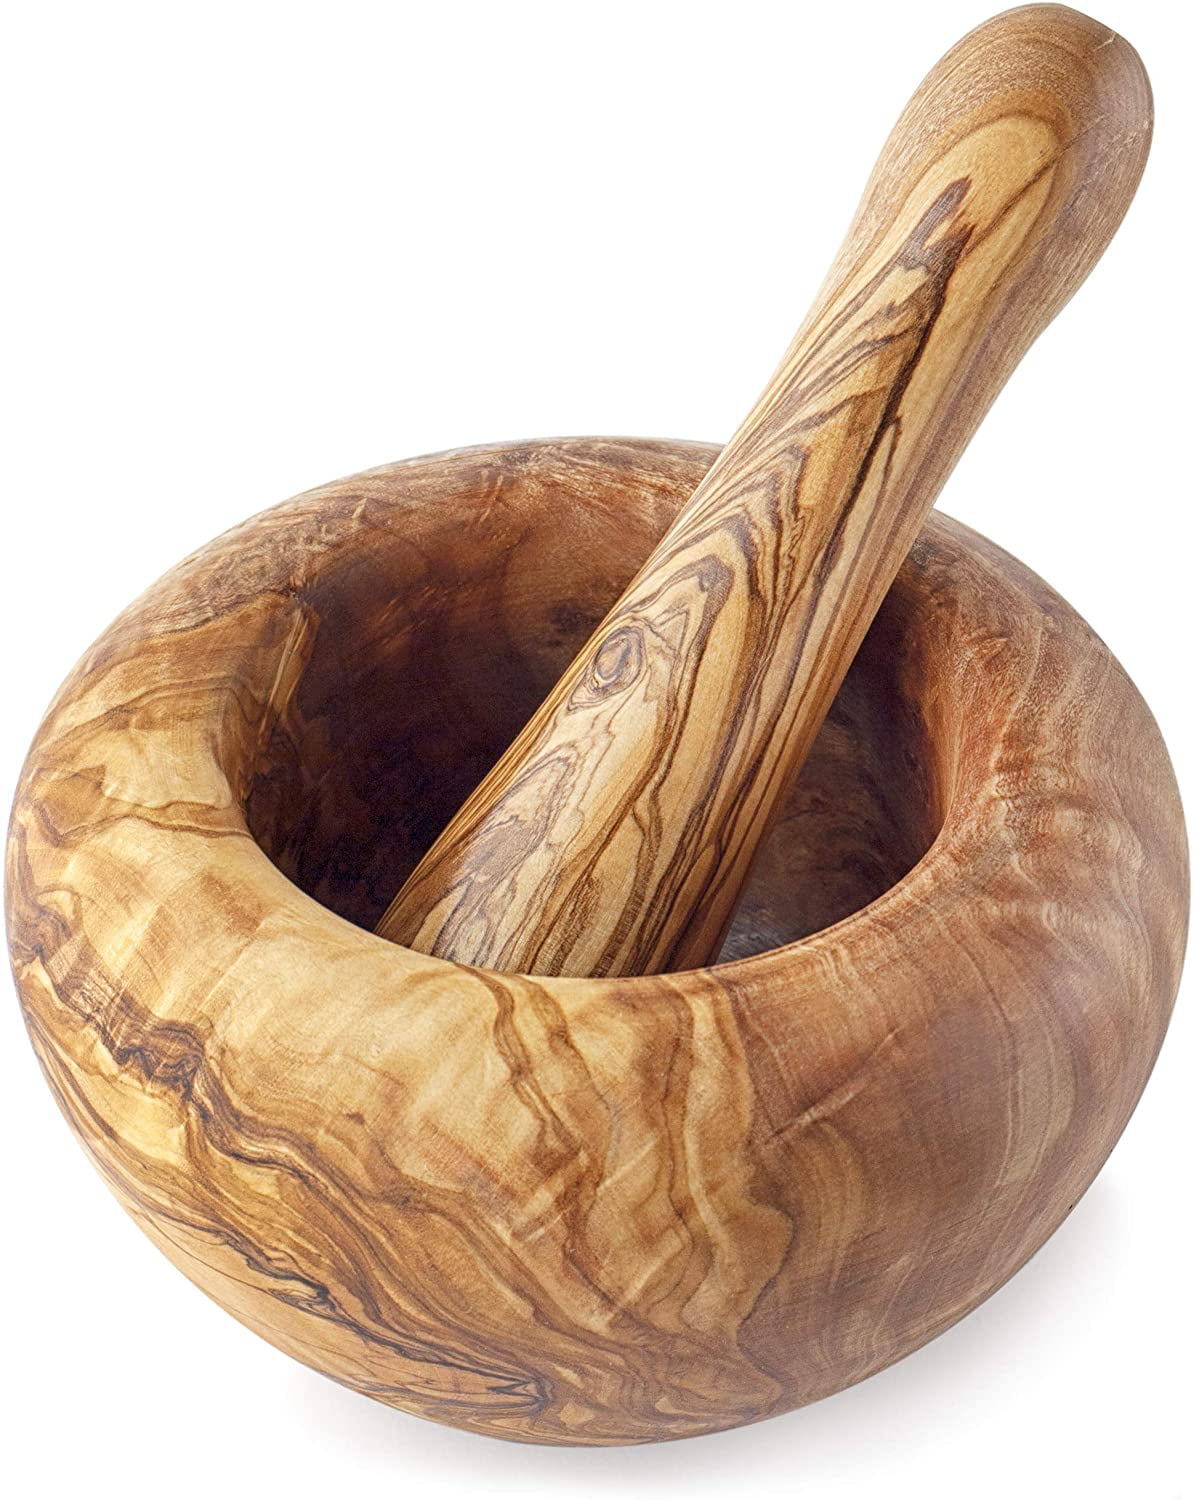 Mortar and Pestle Olive Wood in S XL / Wooden Mortar Set handmade rustic